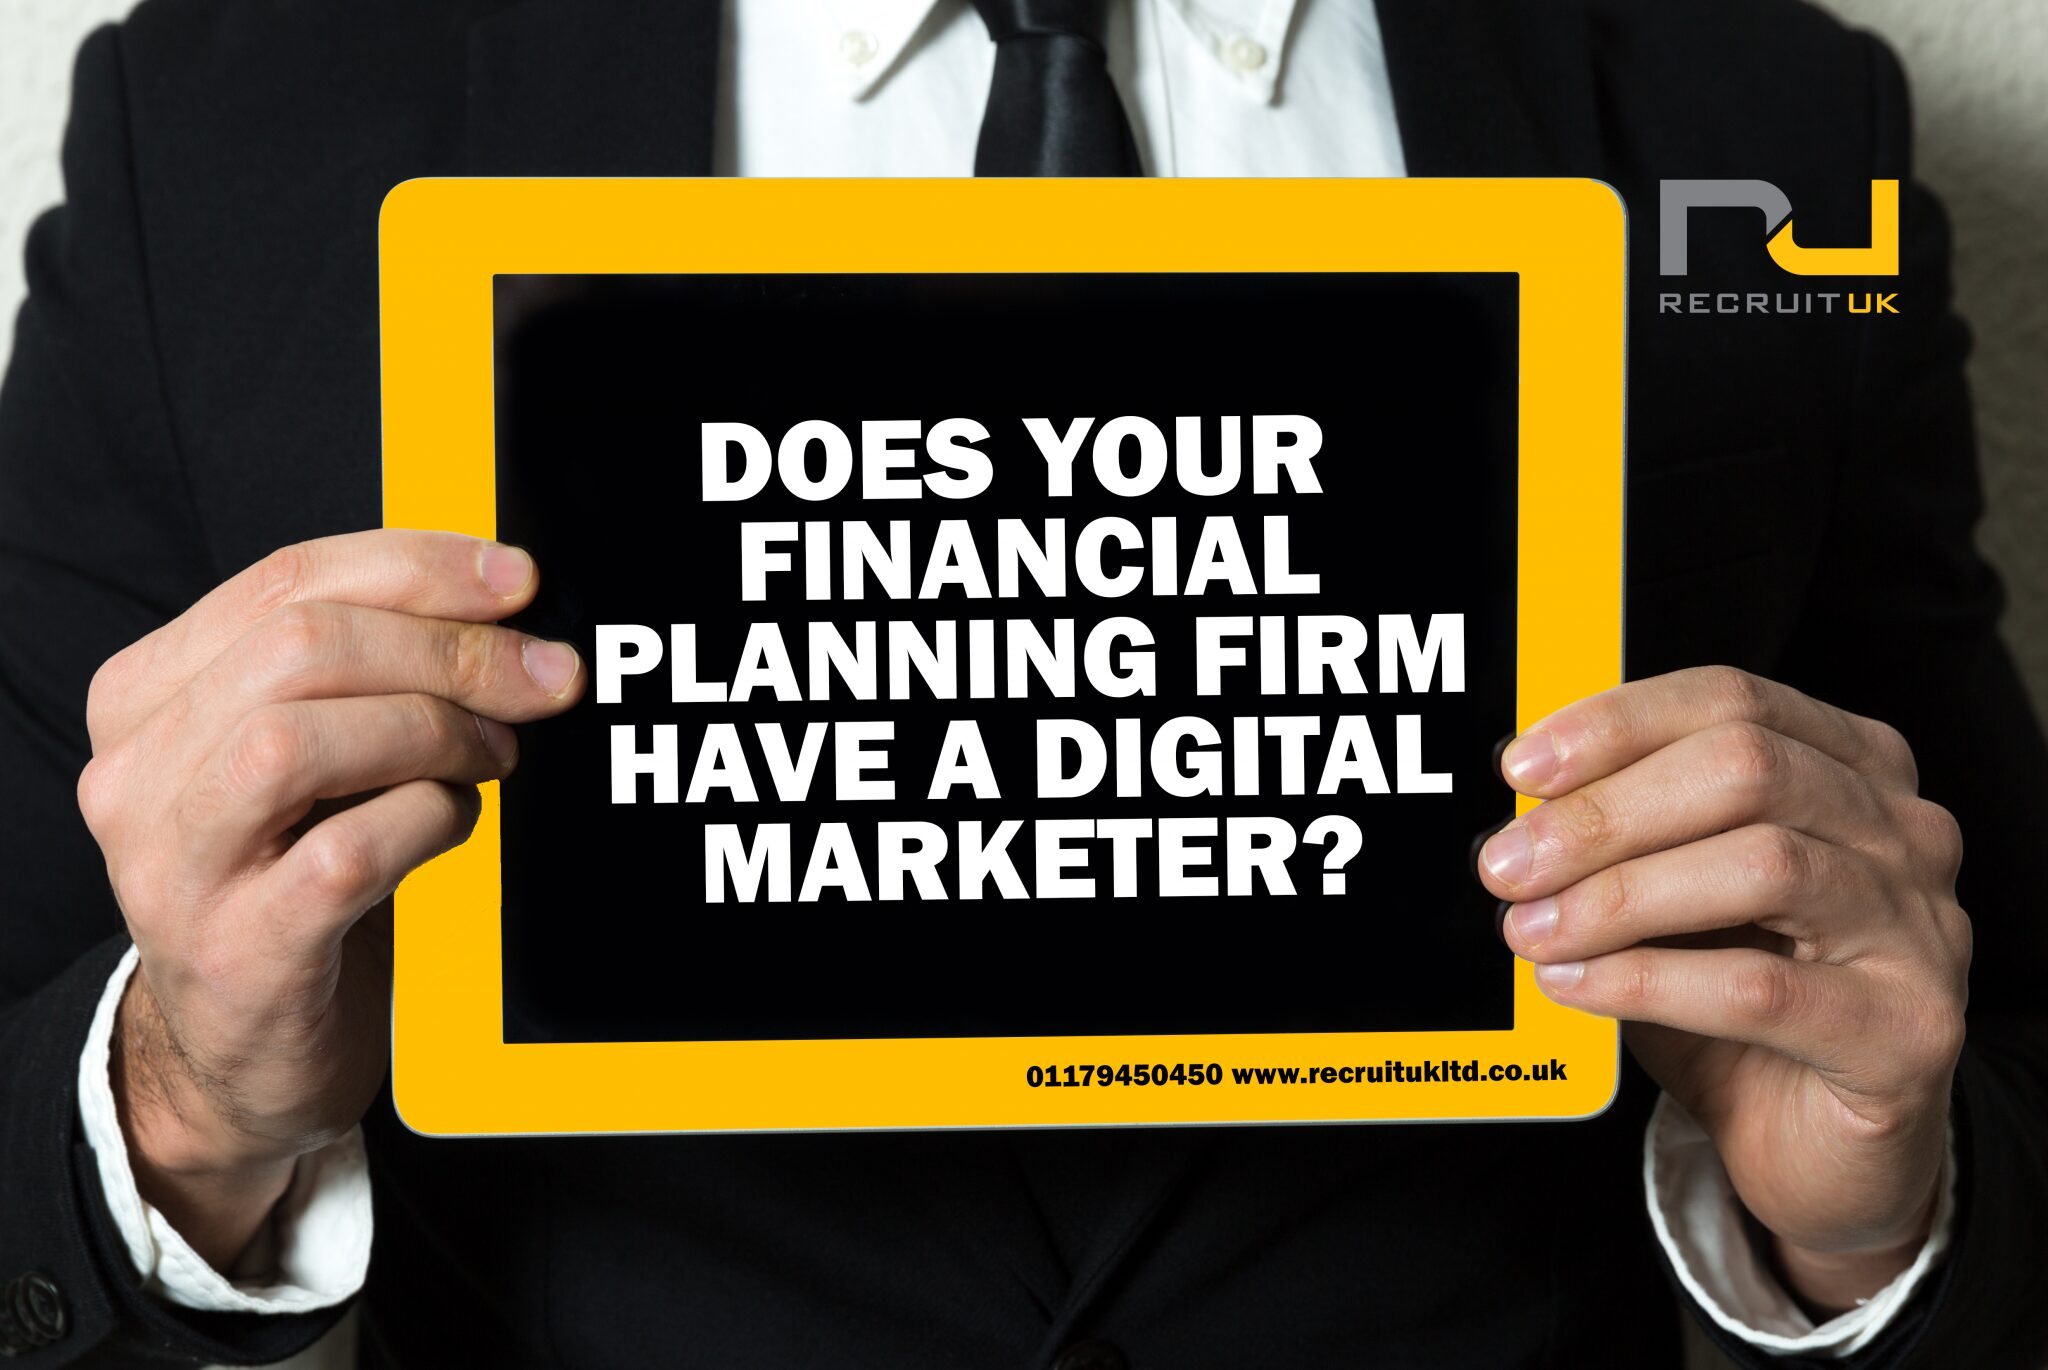 Man holding a sign saying 'Does your financial planning firm have a digital marketer?'